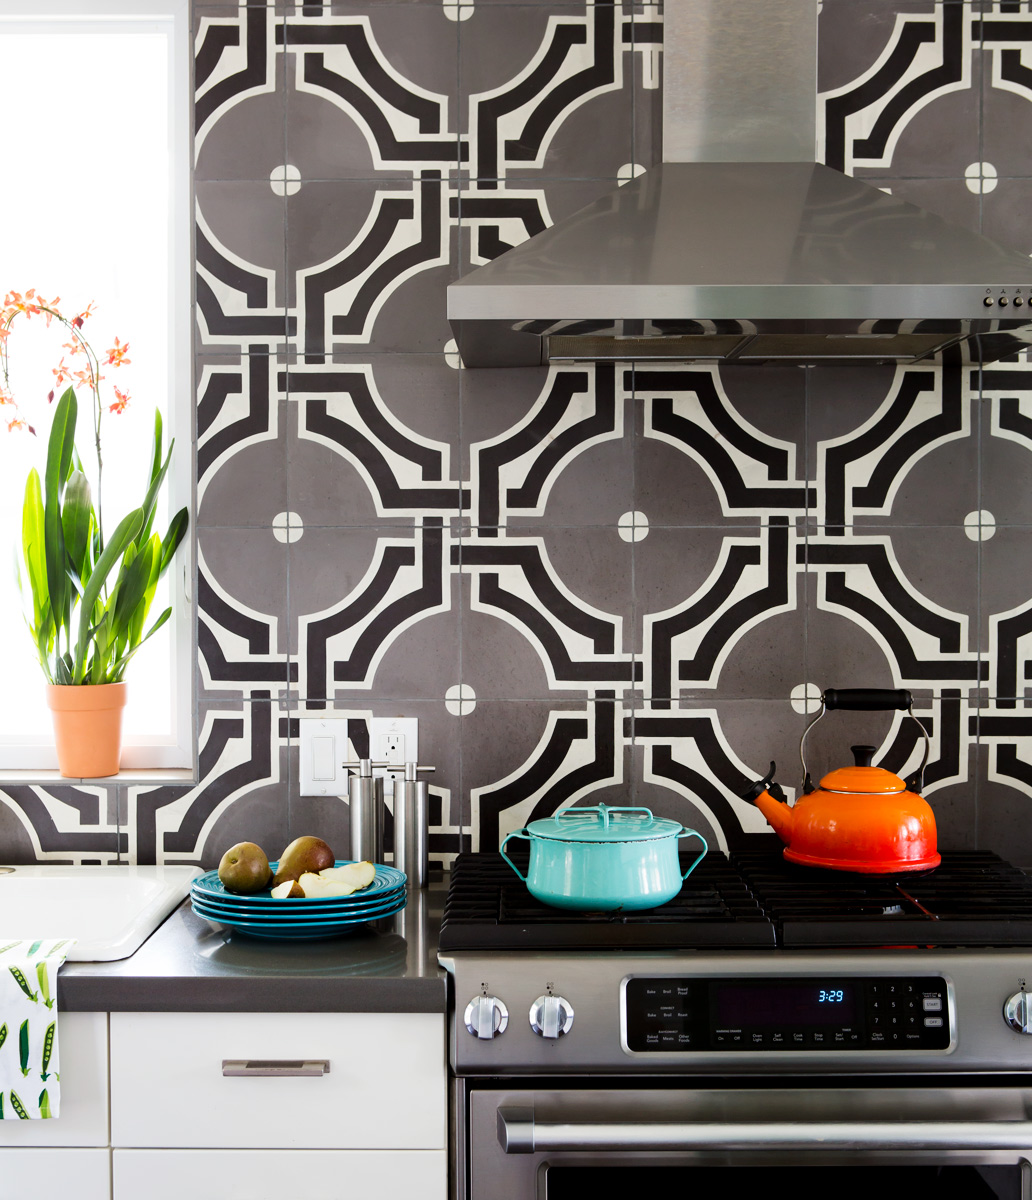 Details of kitchen with tile by interior photographer Buff Strickland